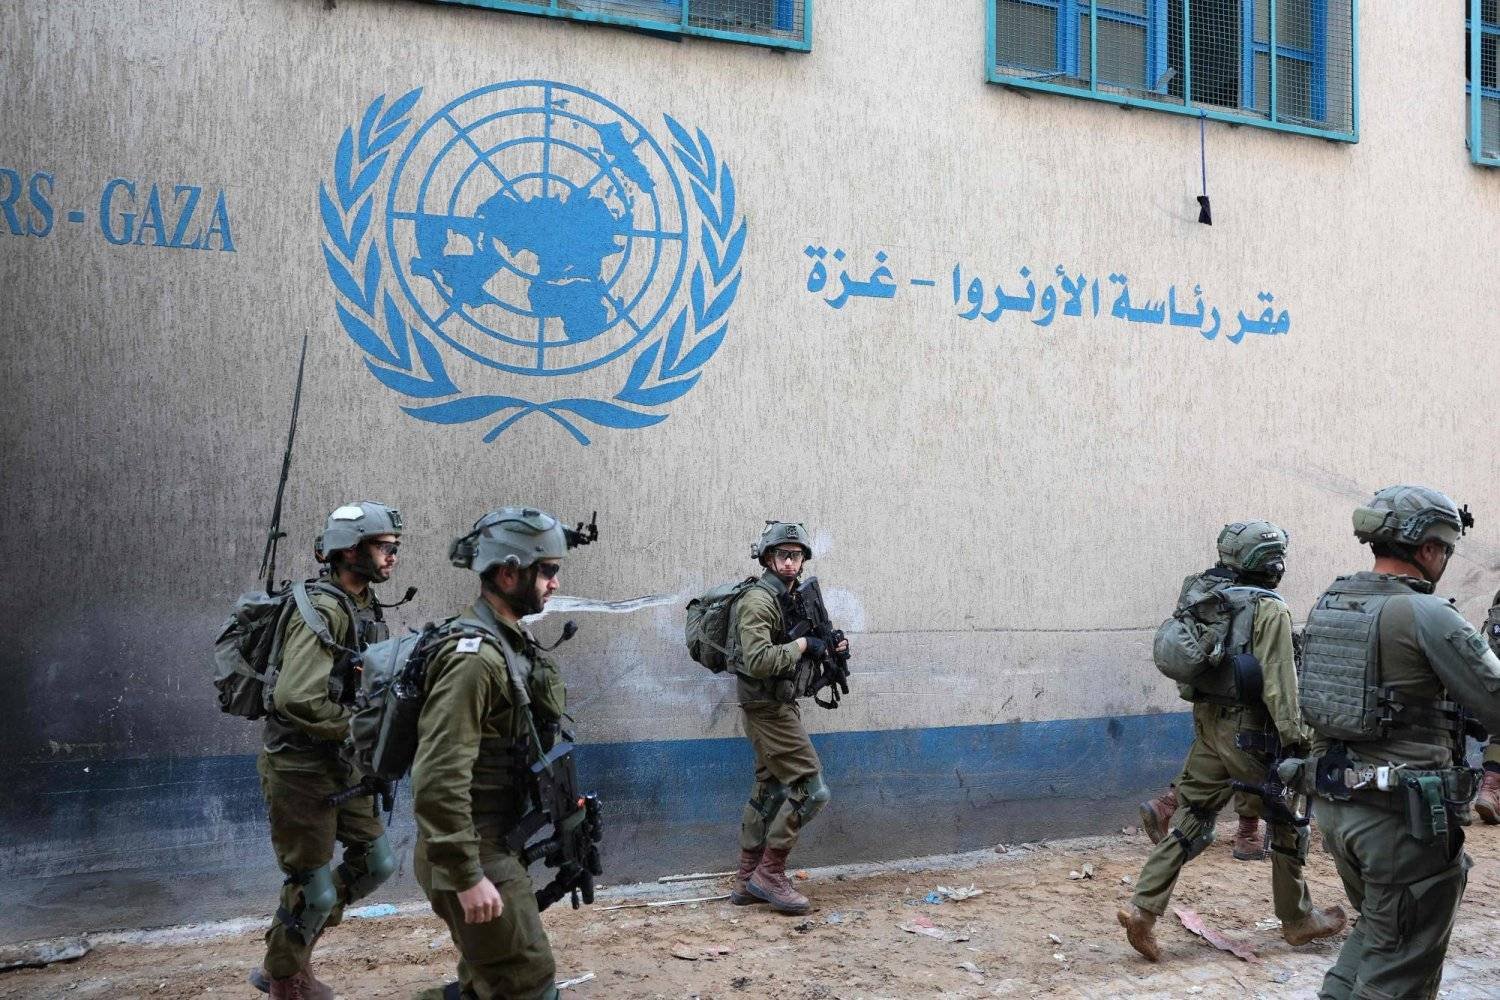 “The dismantling of UNRWA represents the abolition of refugee status for millions of Palestinians”